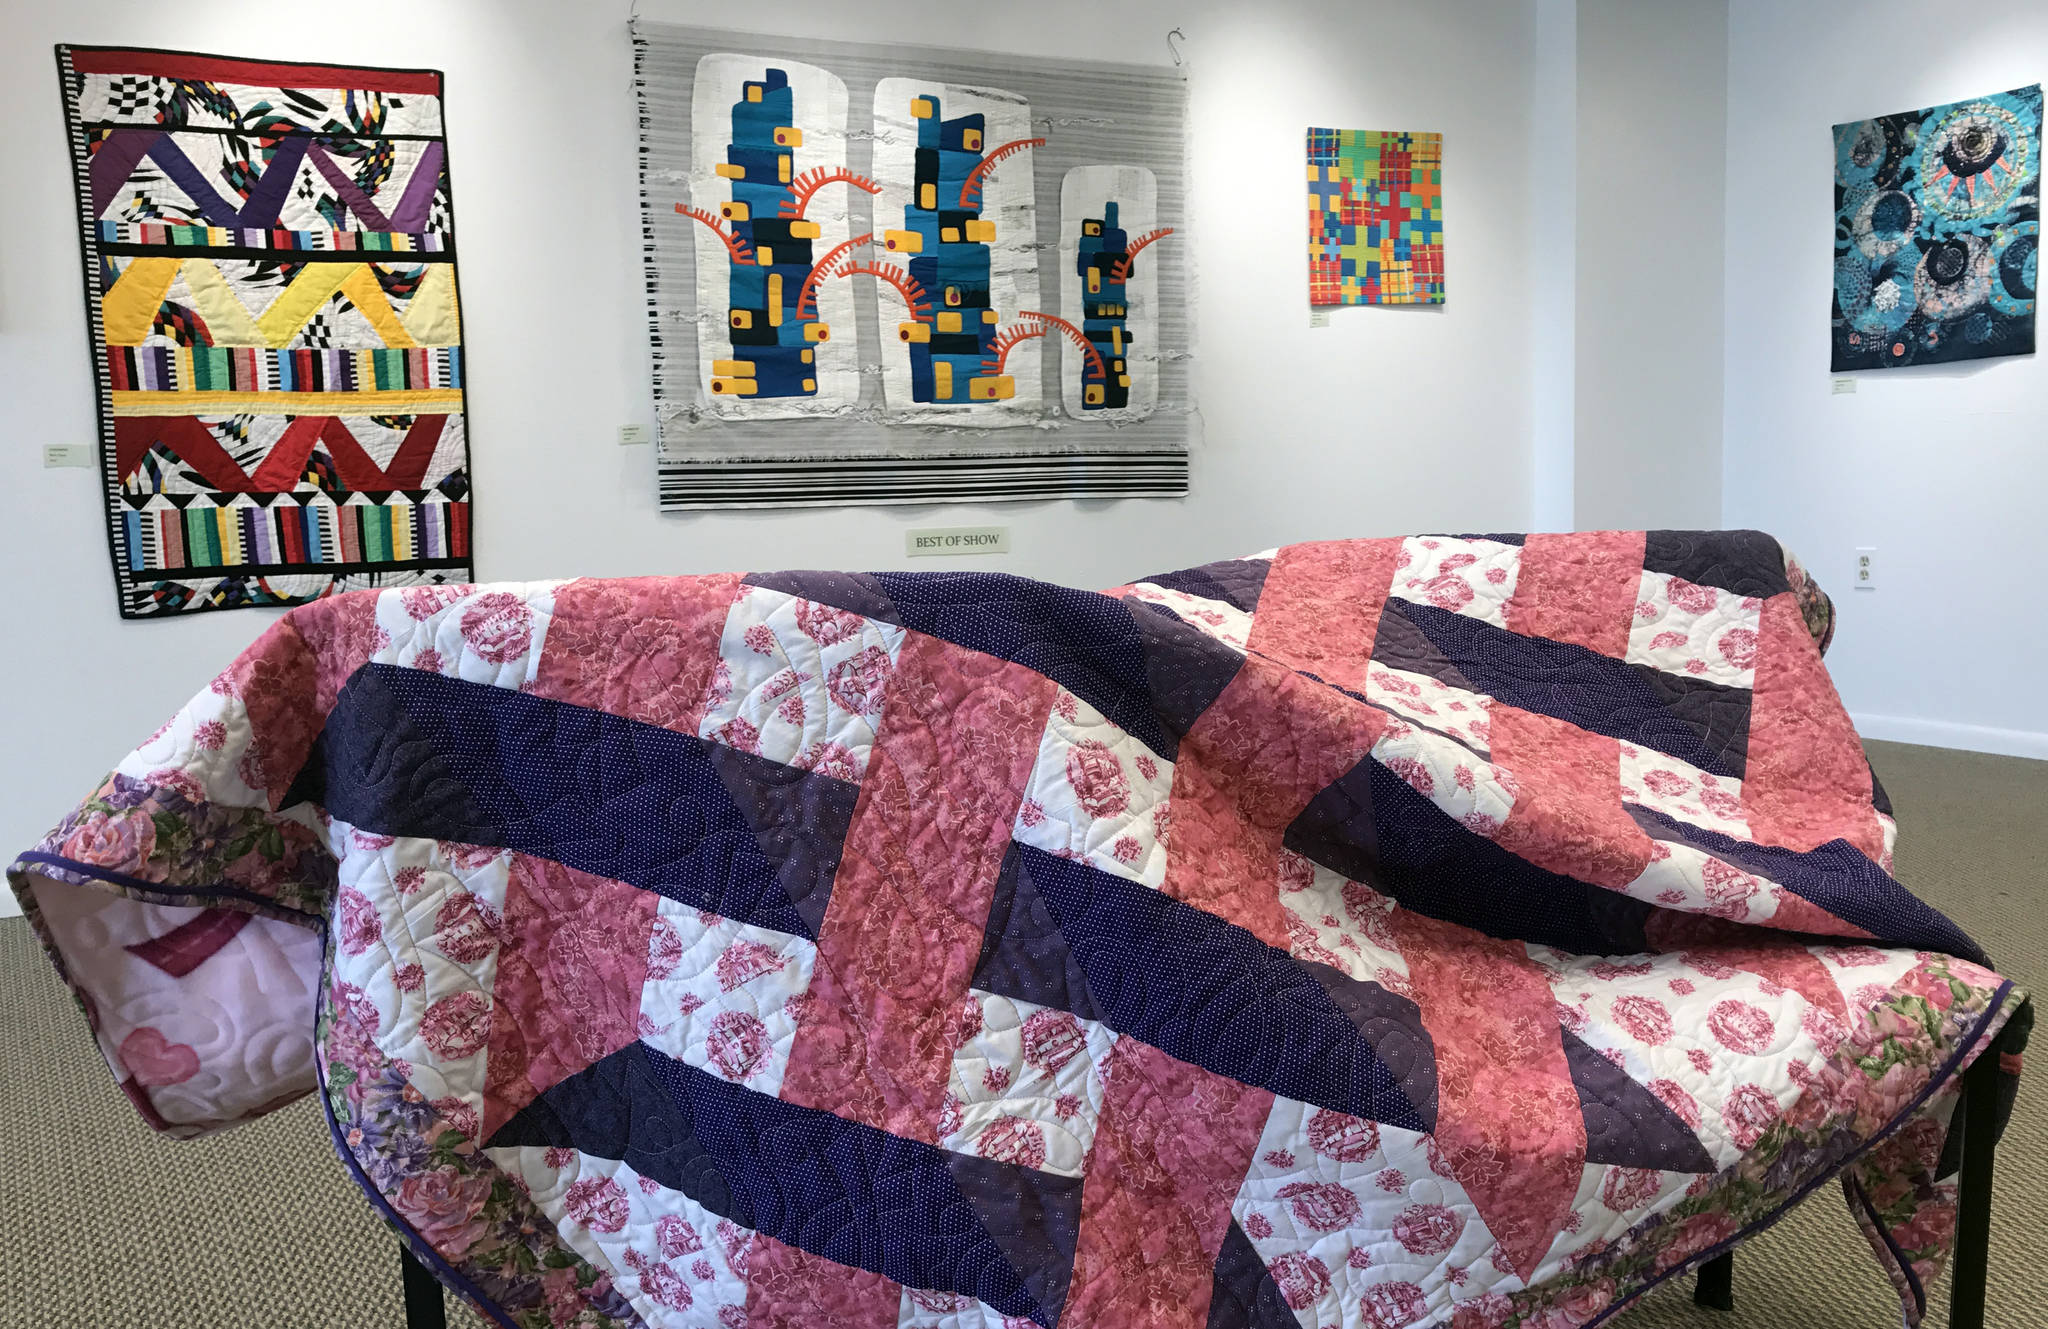 Ann-Lillion Schell is donating a pink and purple quilt to the Kenai Fine Art Center’s Annual Harvest Auction, to be held September 30, 2017 in Kenai, Alaska. She also has work hanging in the center’s monthly gallery installation, “Arts Quilts Extra-Ordinaire,” which will run until July 1. (Photo by Kat Sorensen/Peninsula Clarion)